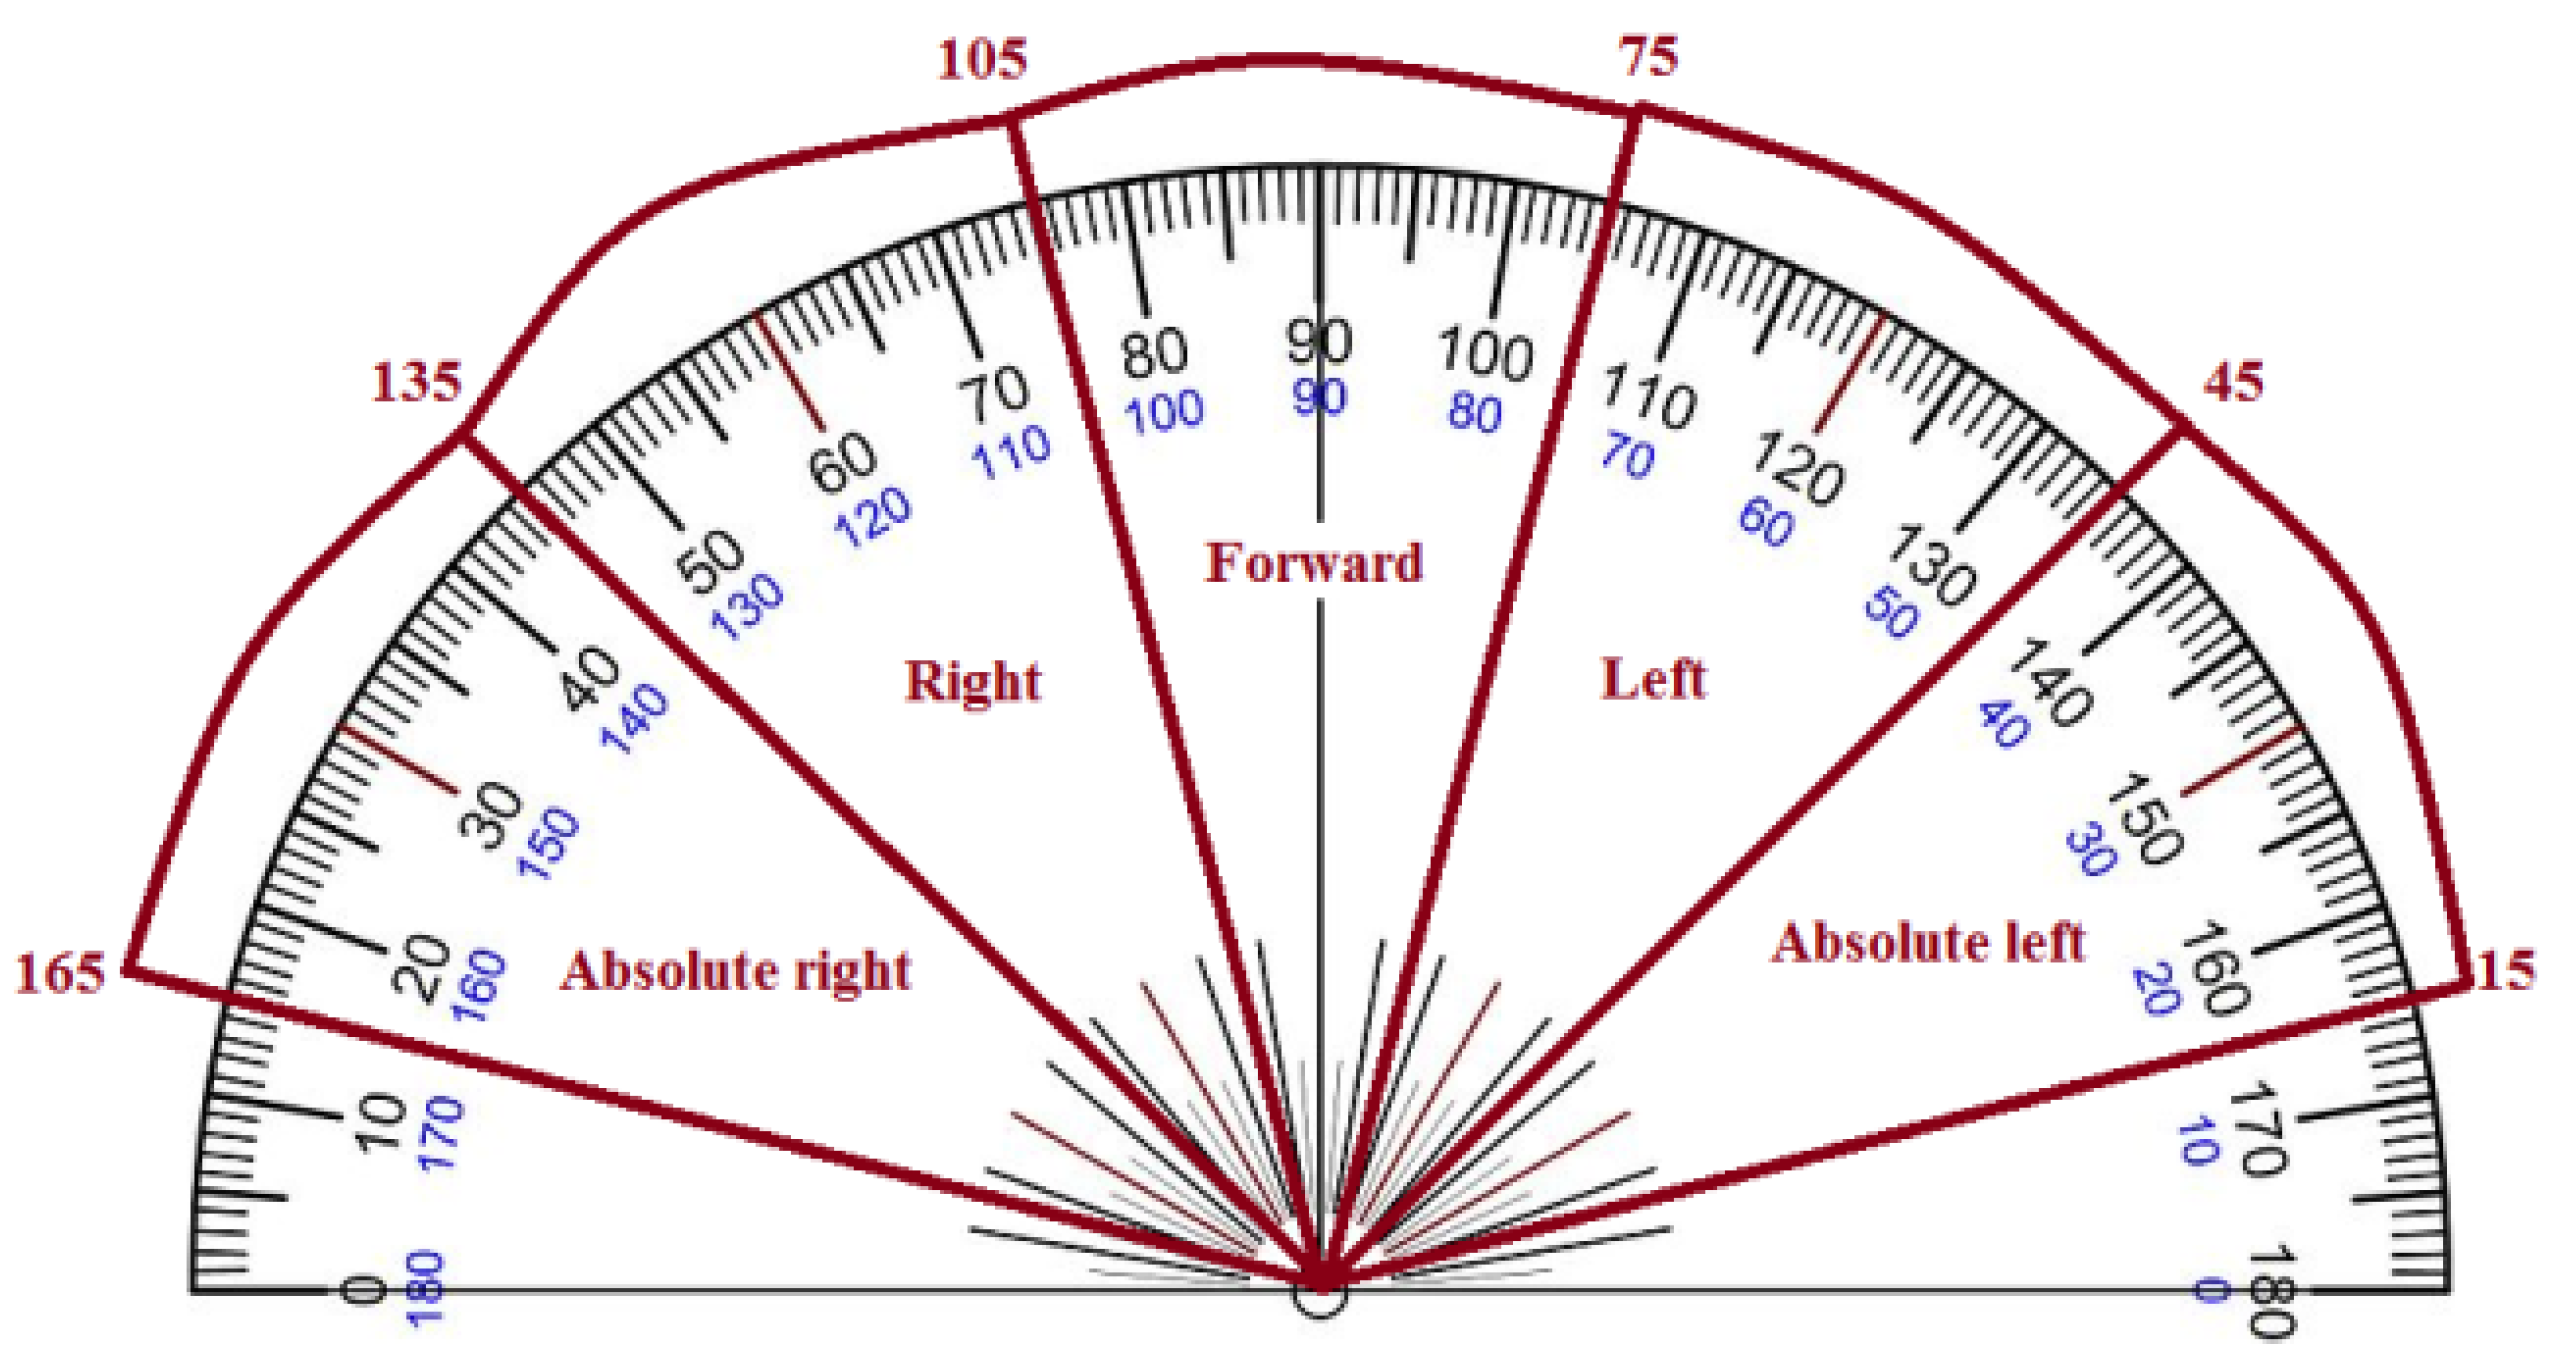 How to construct angles 105 120 135 150 degrees - Compass 